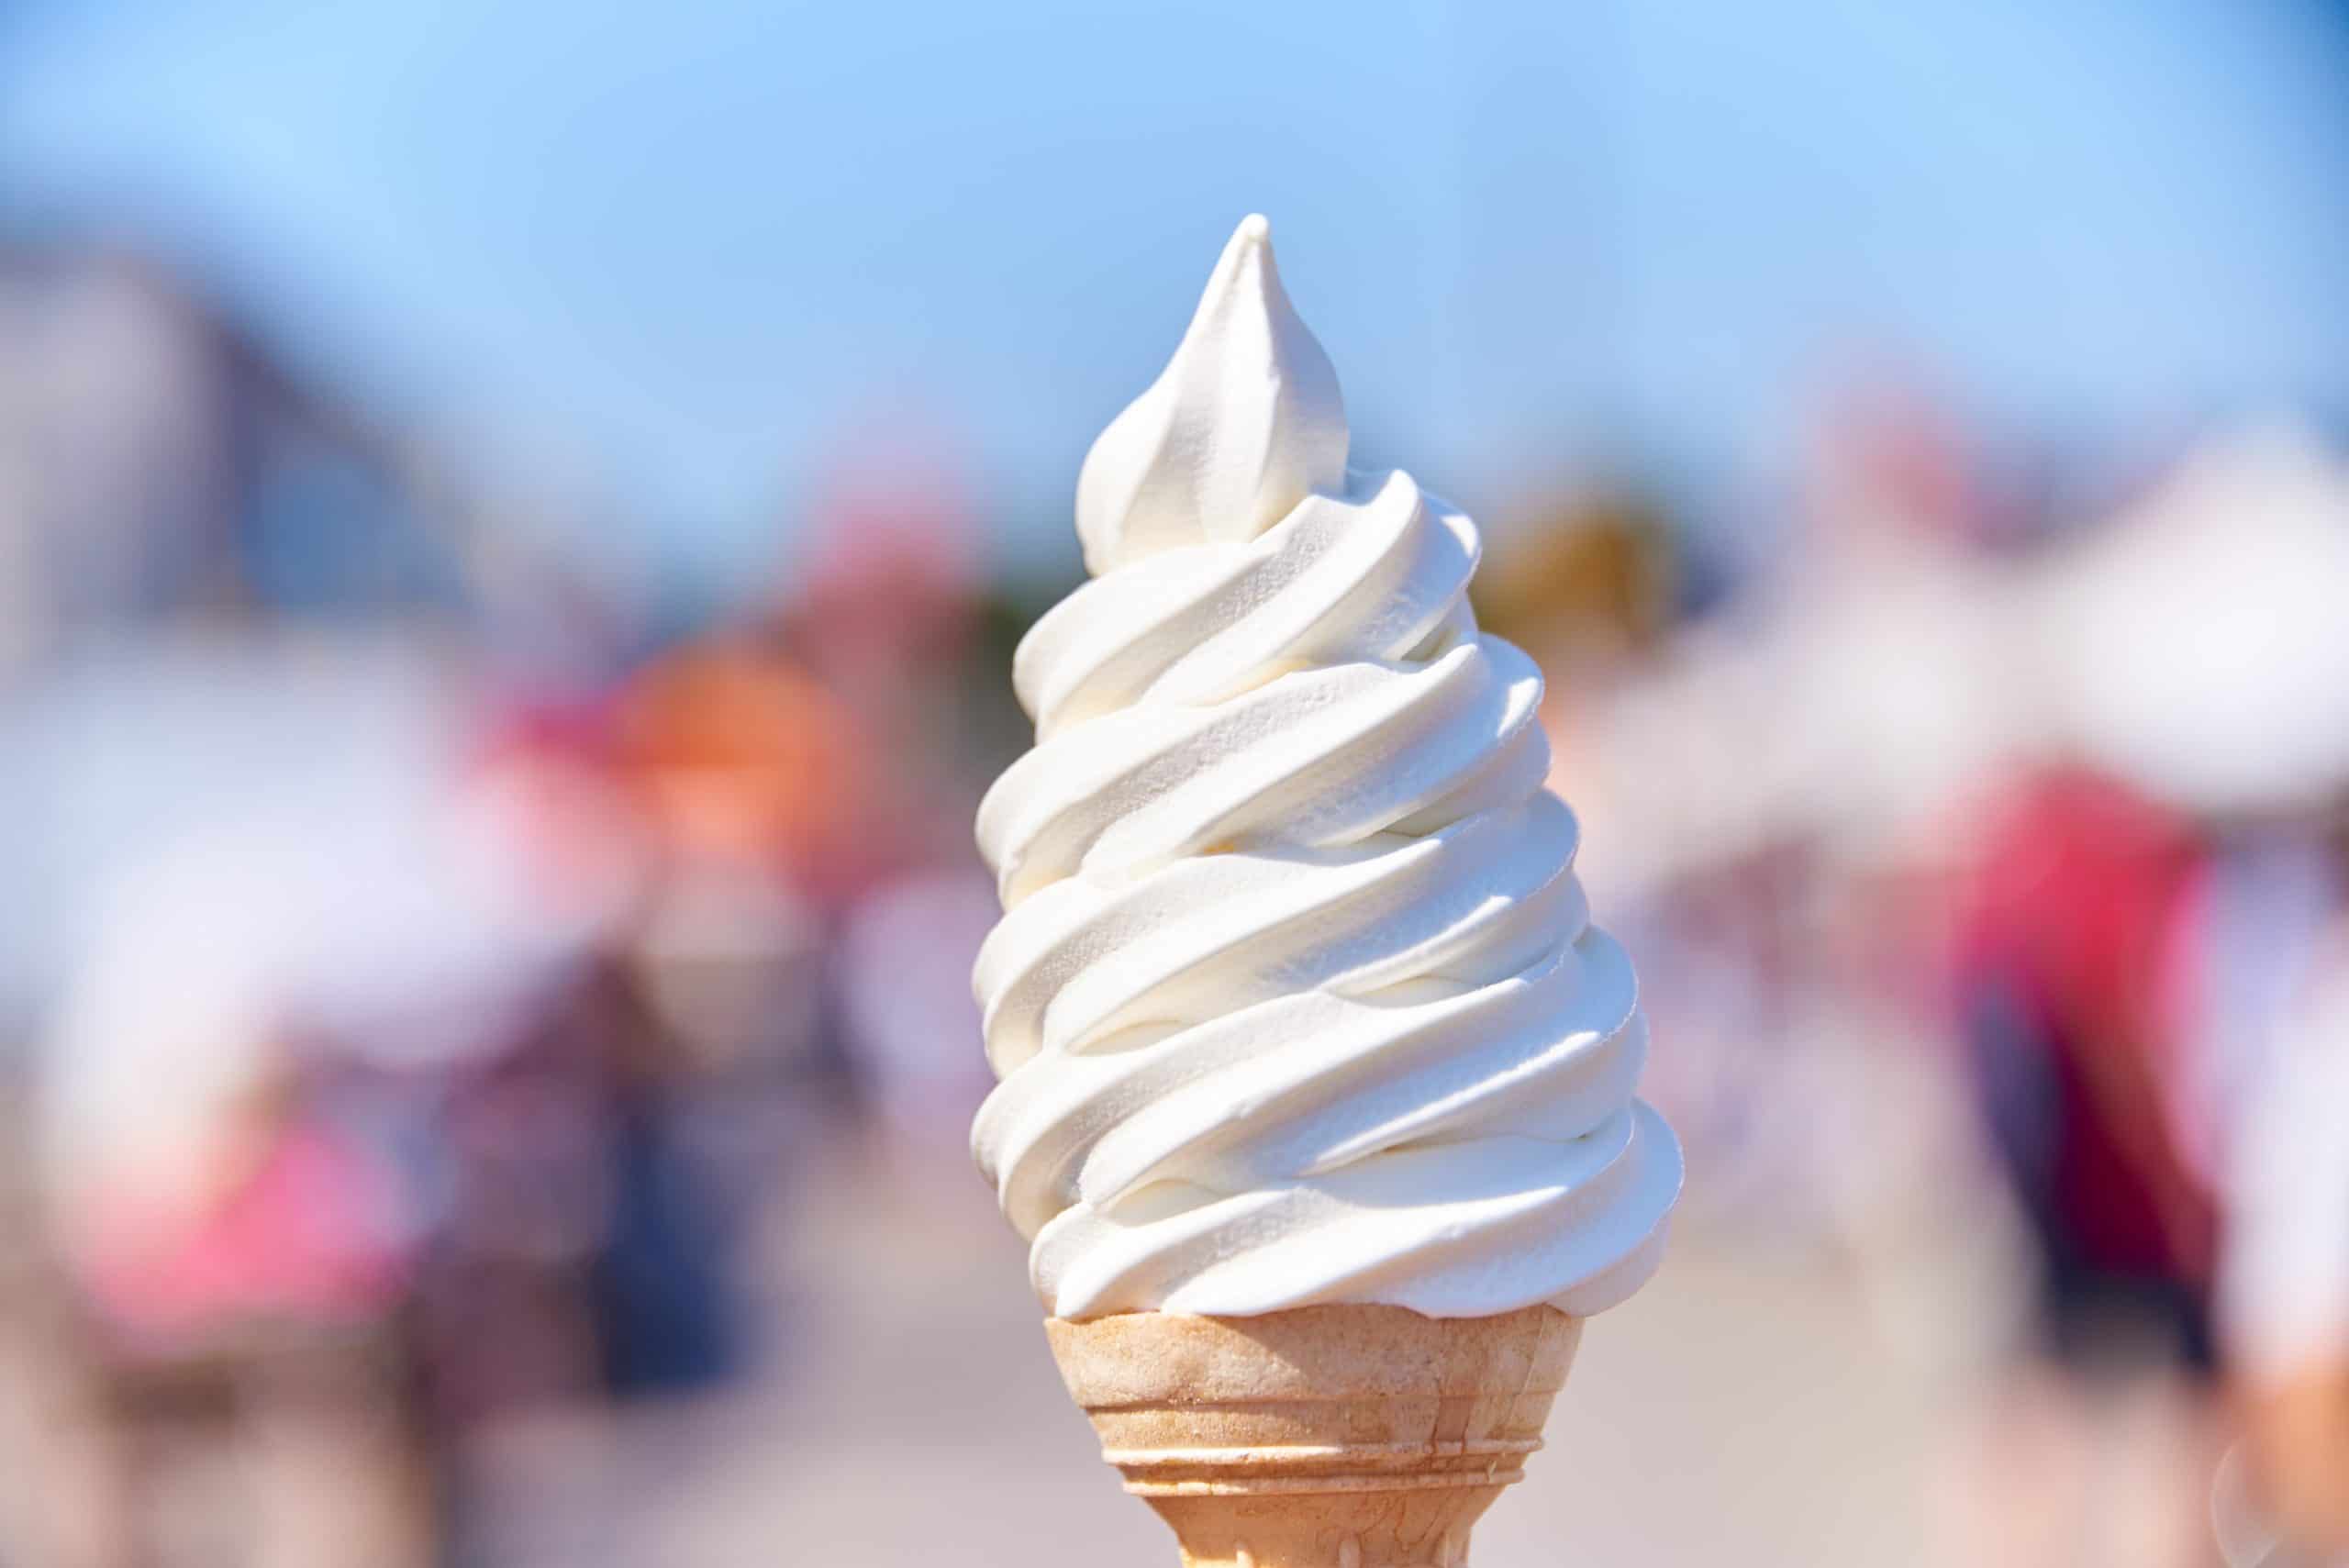 Soft serve ice cream cone at the Market Square in the center of Helsinki, Finland on hot day in July 2018.